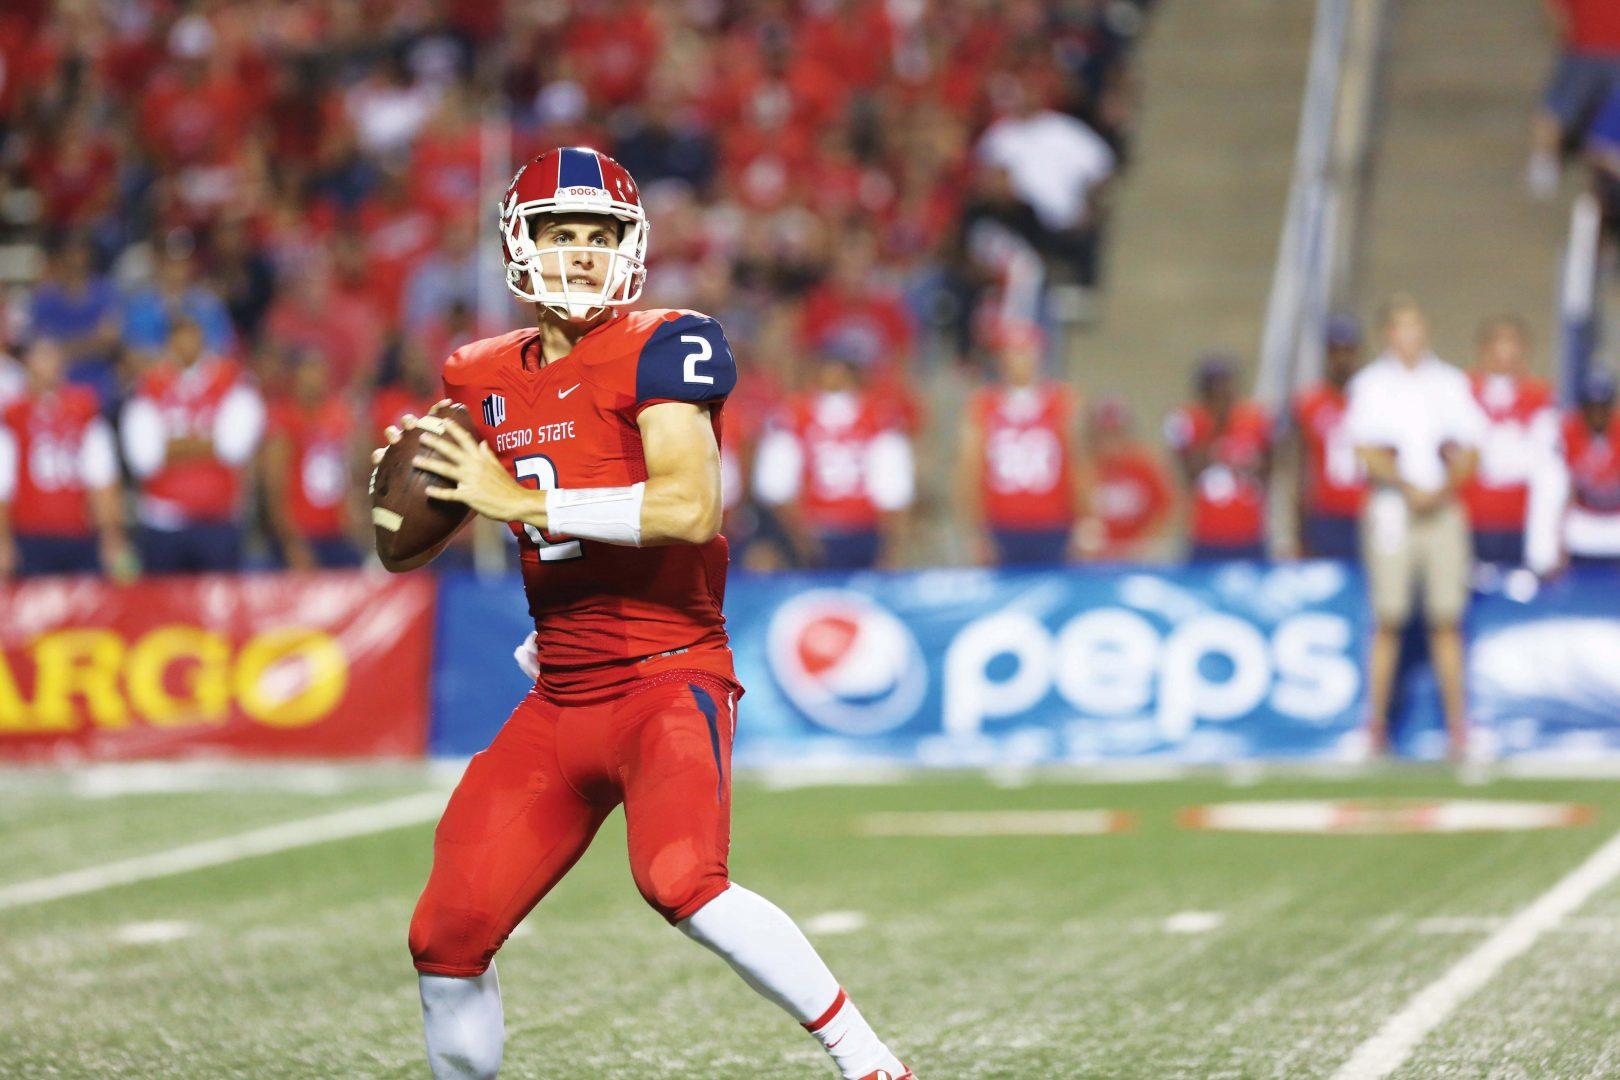 Fresno+State+quarterback+Brian+Burrell+scans+the+backfield+during+the+Bulldogs+55-19+loss+to+Nebraska.+Photo+by+Khlarissa+Agee%2FThe+Collegian